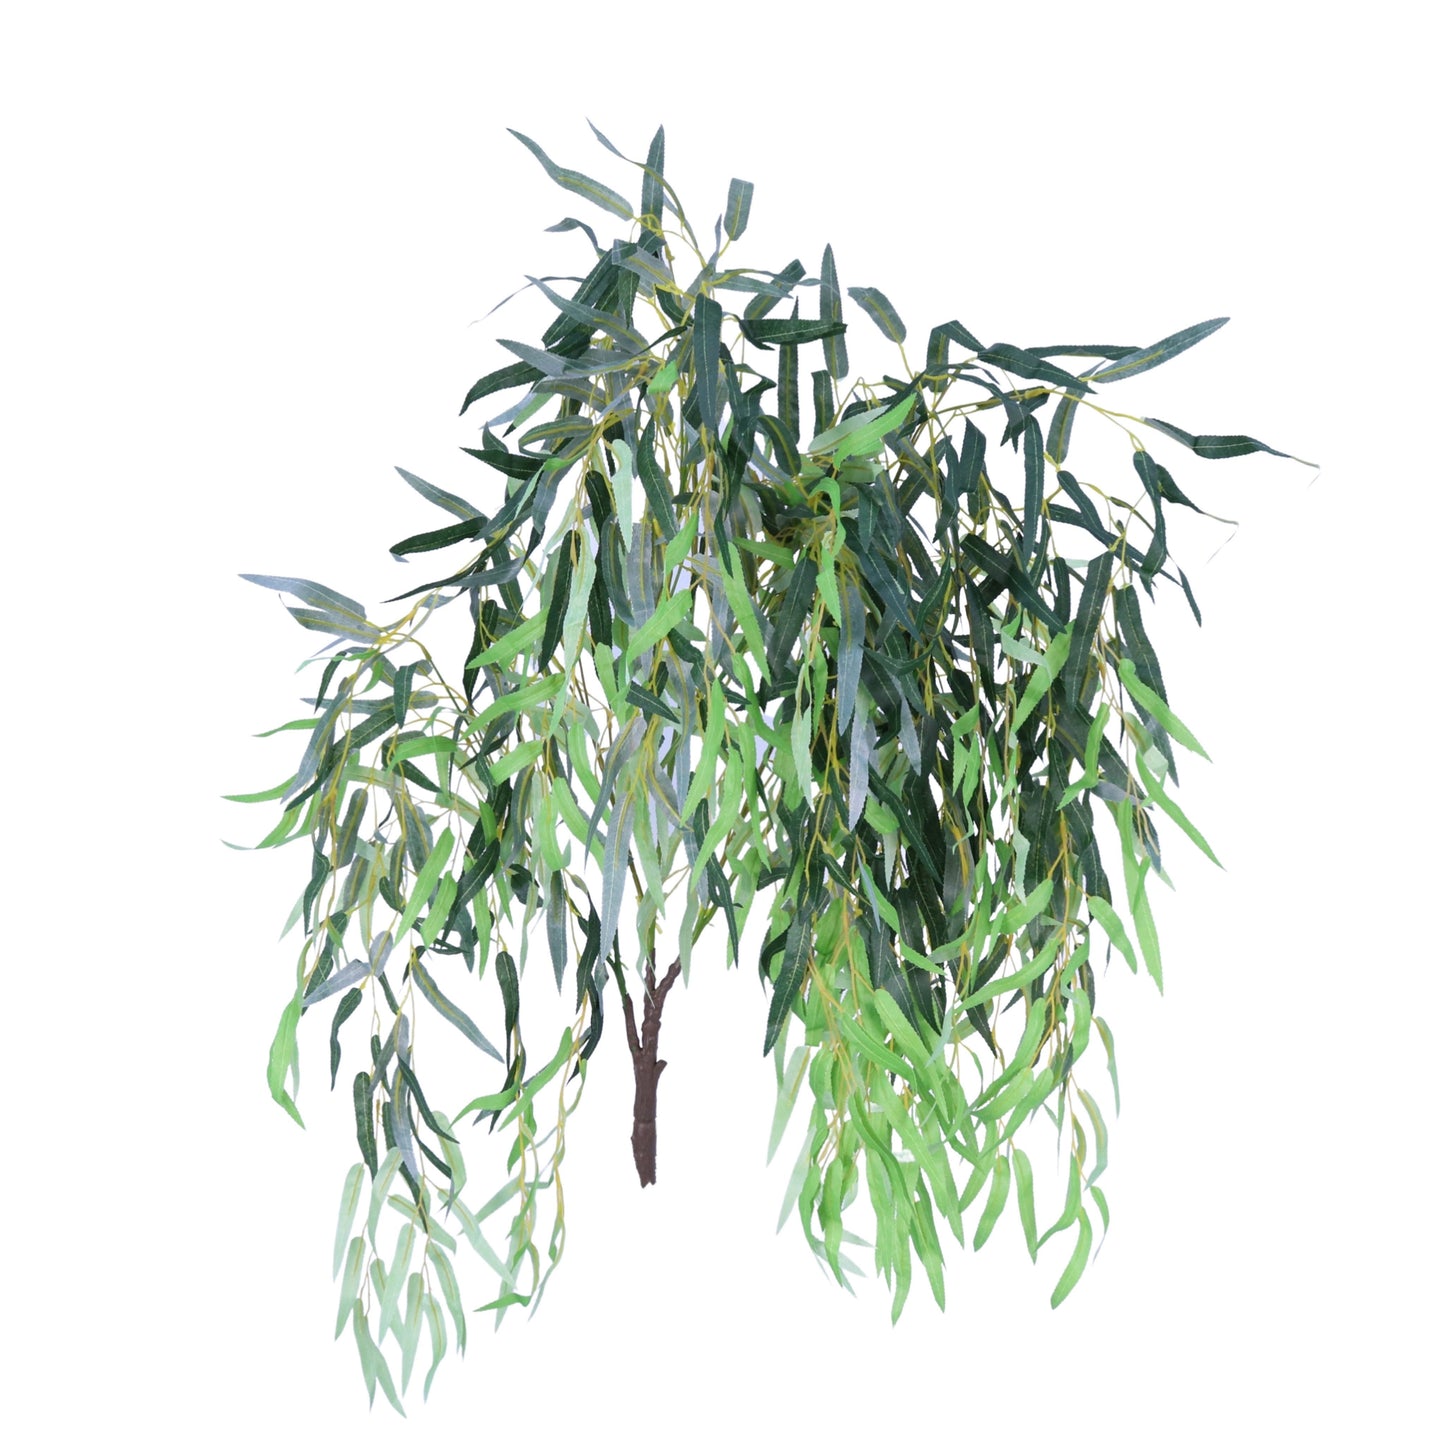 SY10675 WEEPING WILLOW TREE BRANCH,48in